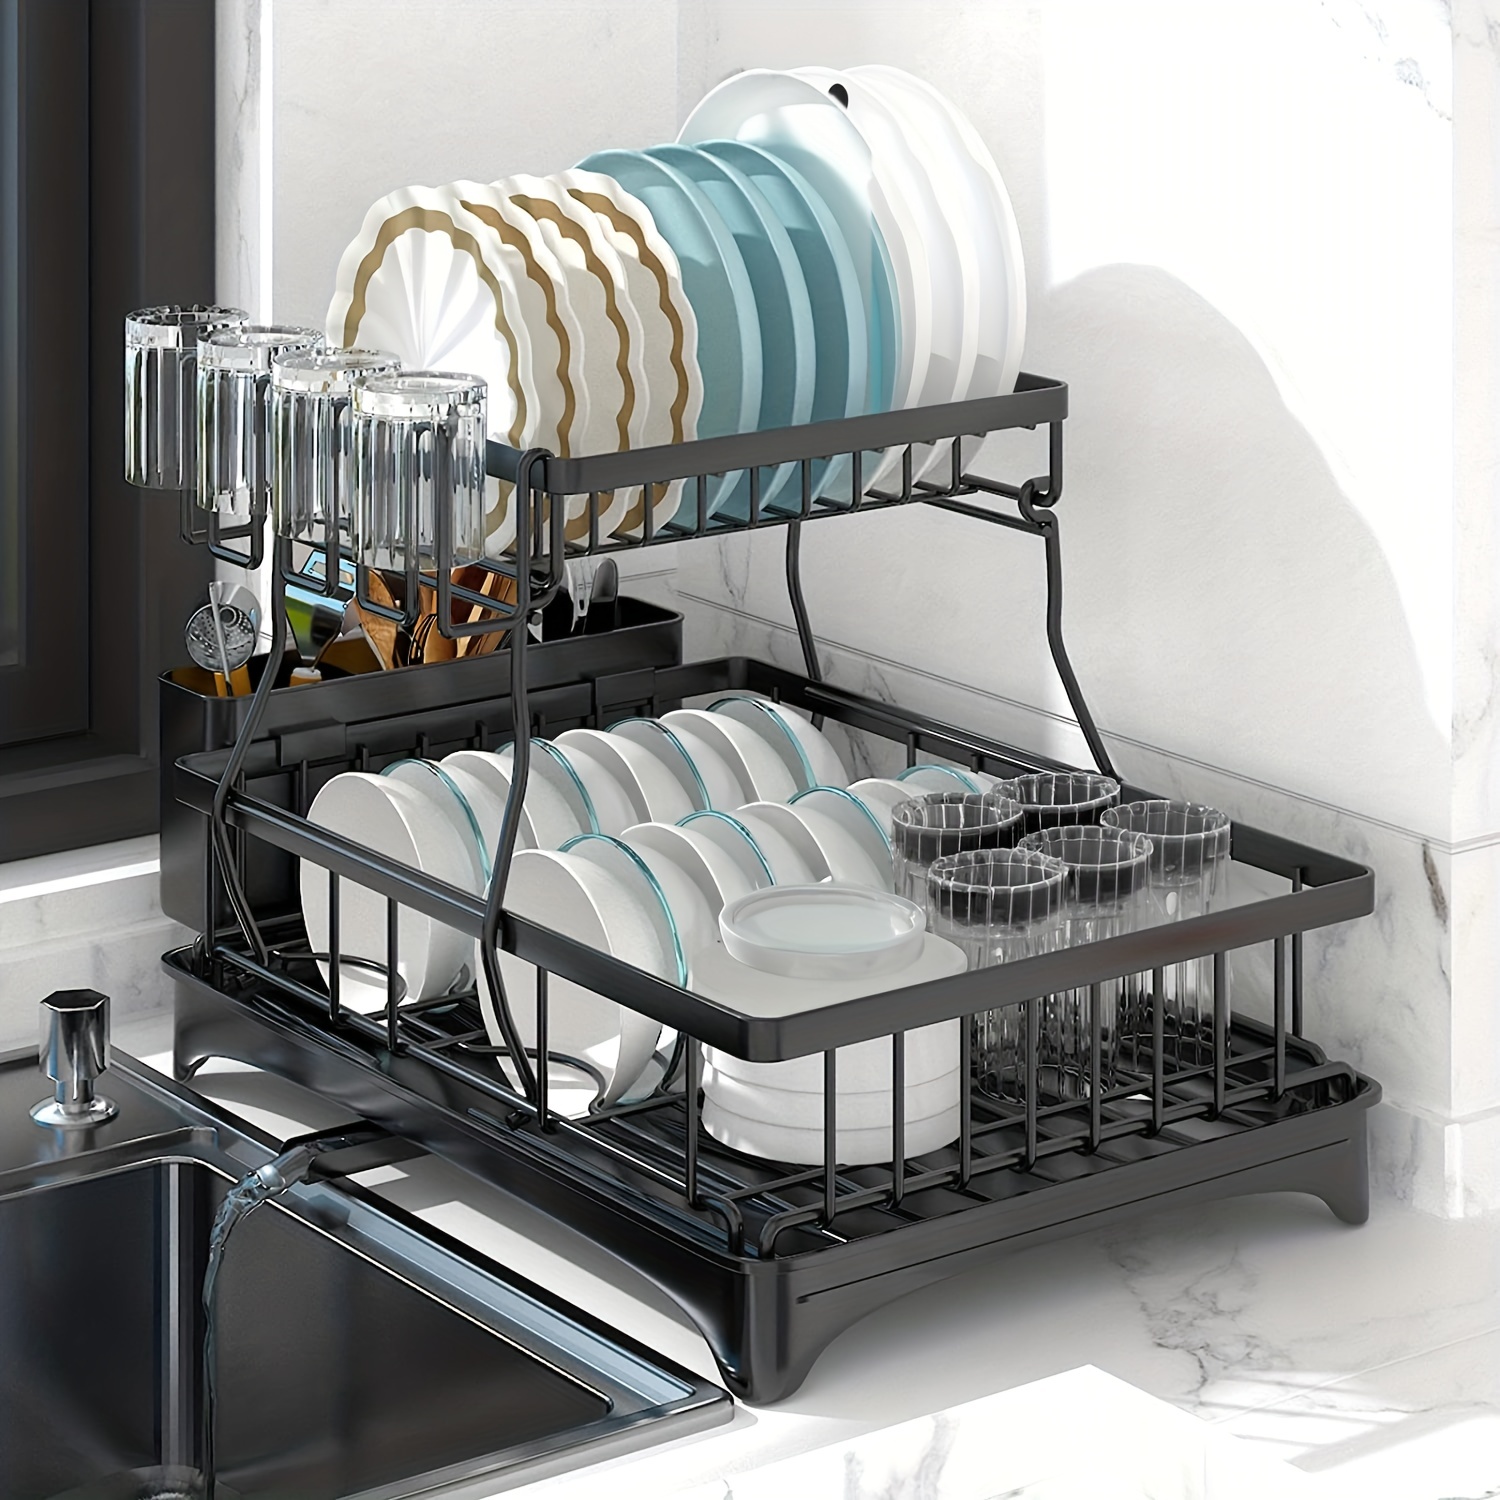 GSlife Dish Drying Rack with Drainboard - Large 2 Tier Dish Rack with 12  Plate Slot, Dish Racks for Kitchen Counter with Utensil Holder Cup Holders